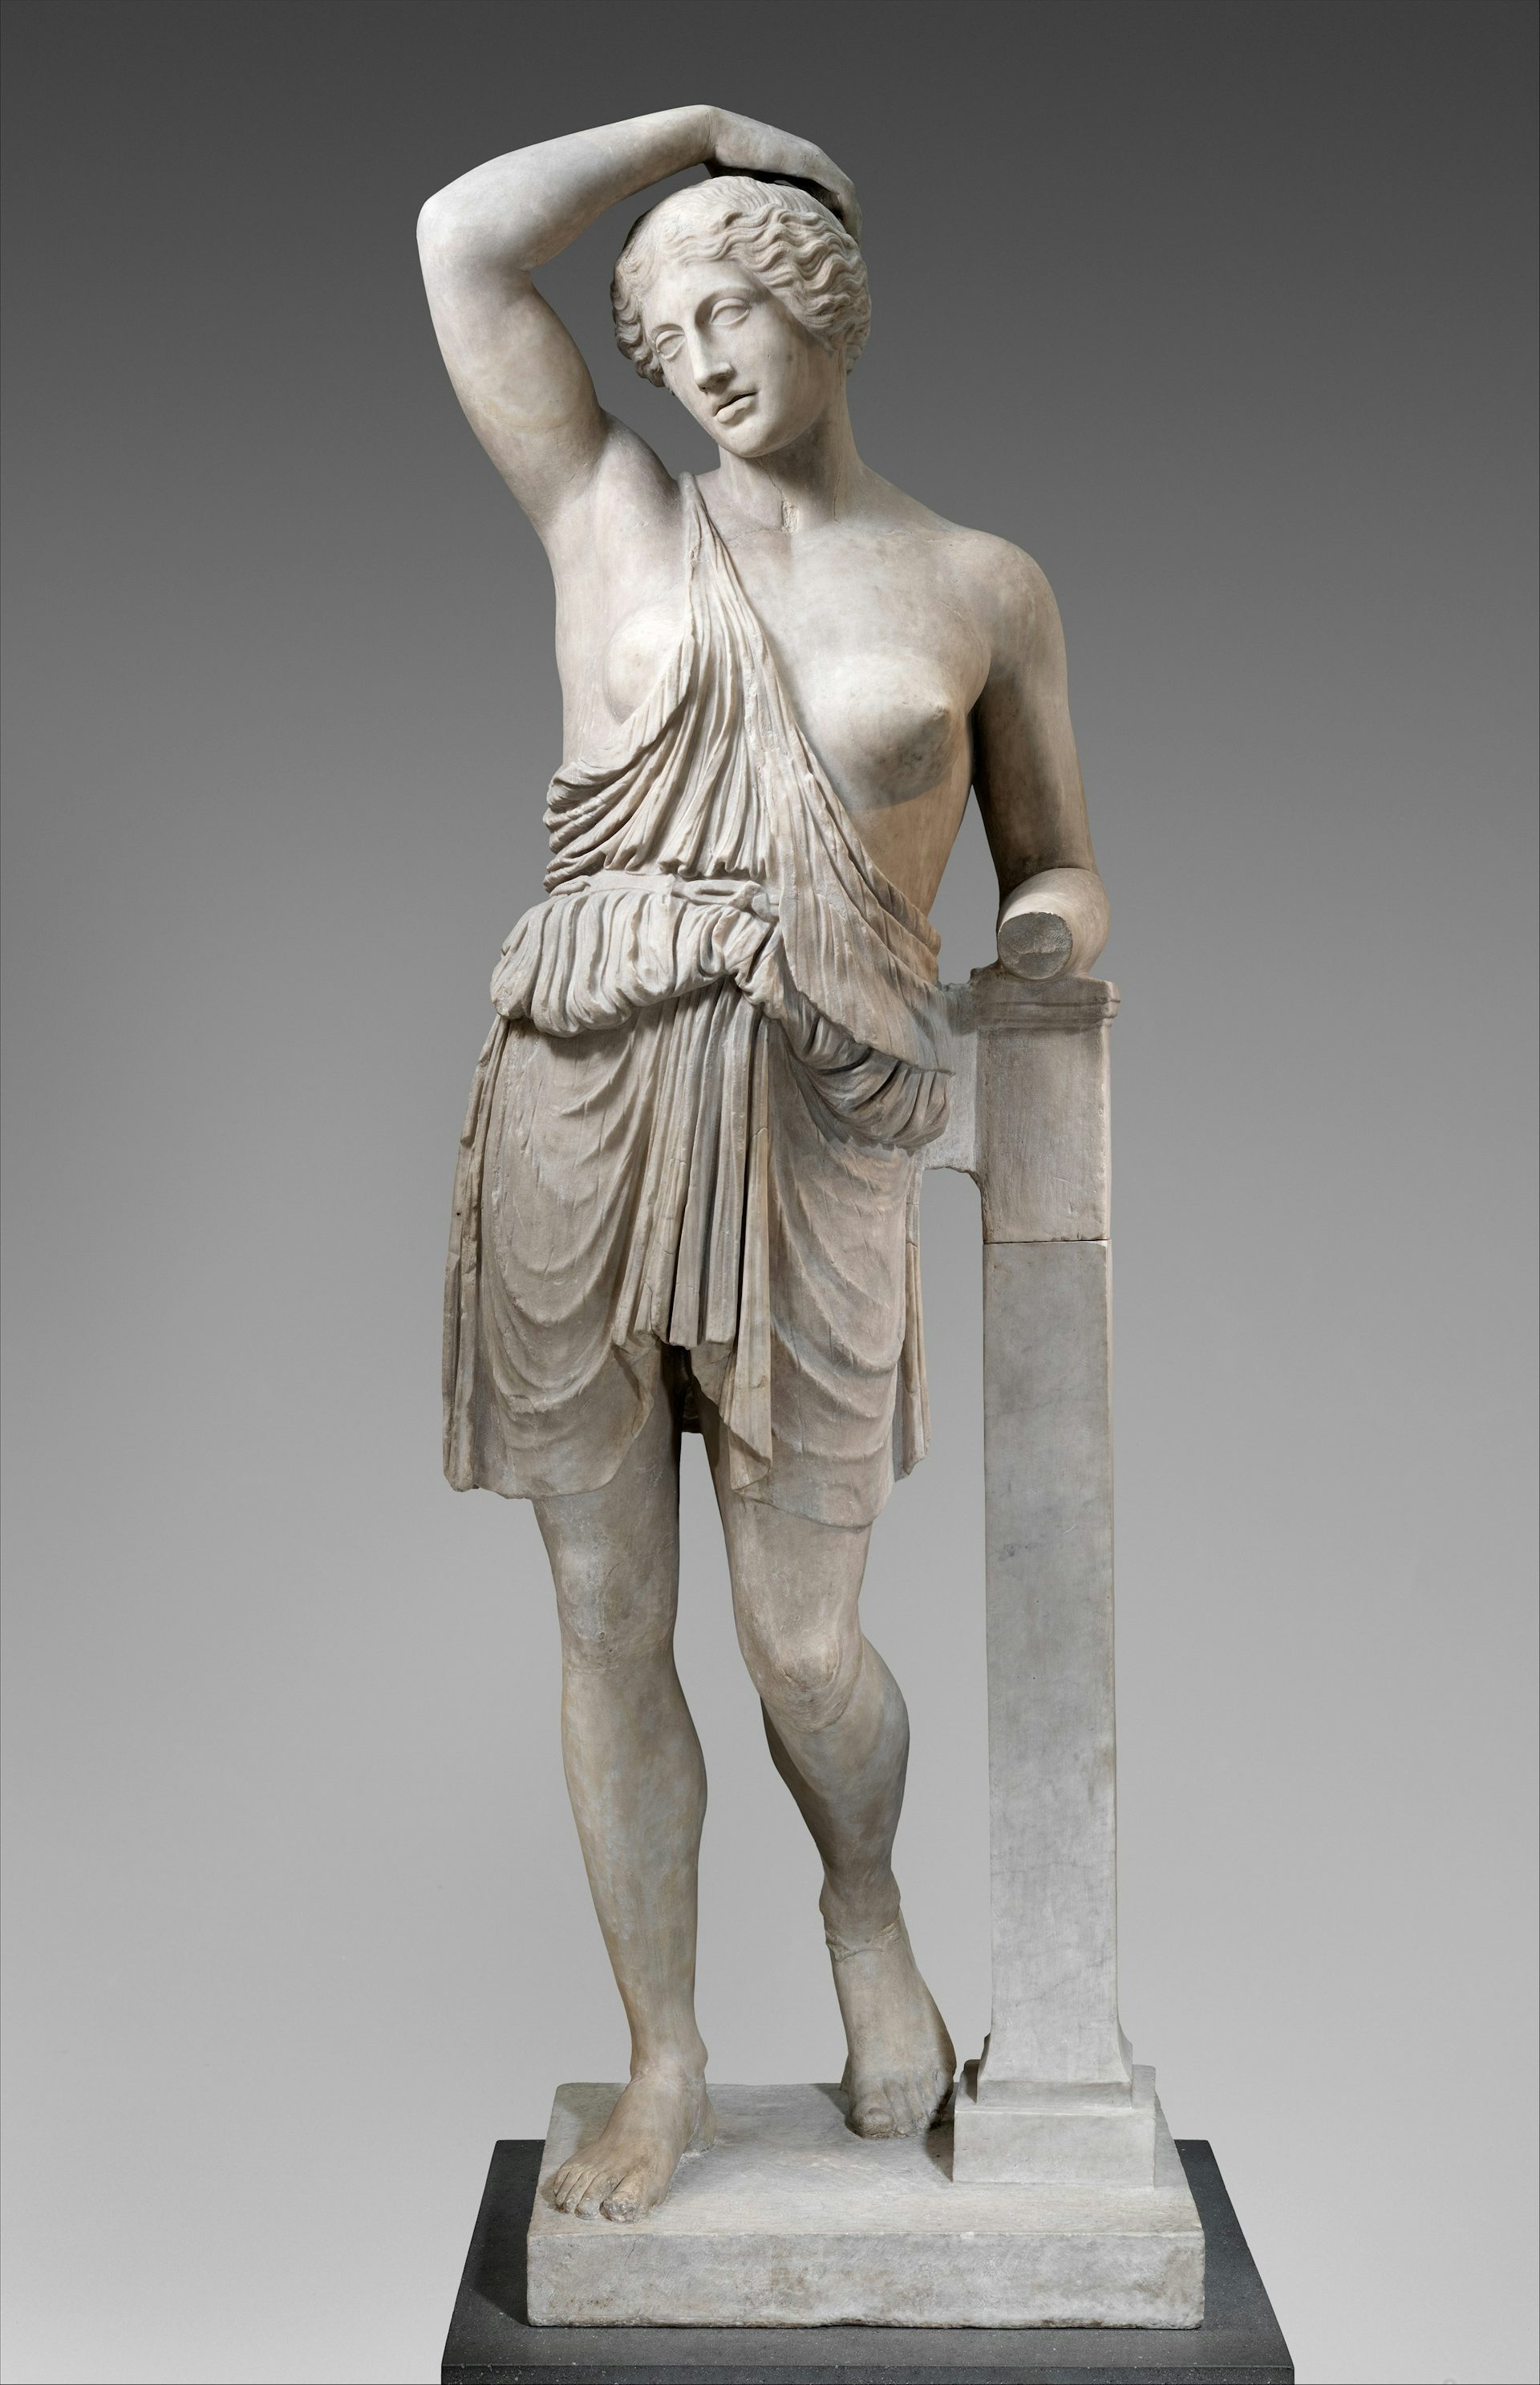 Roman statue of a wounded Amazon